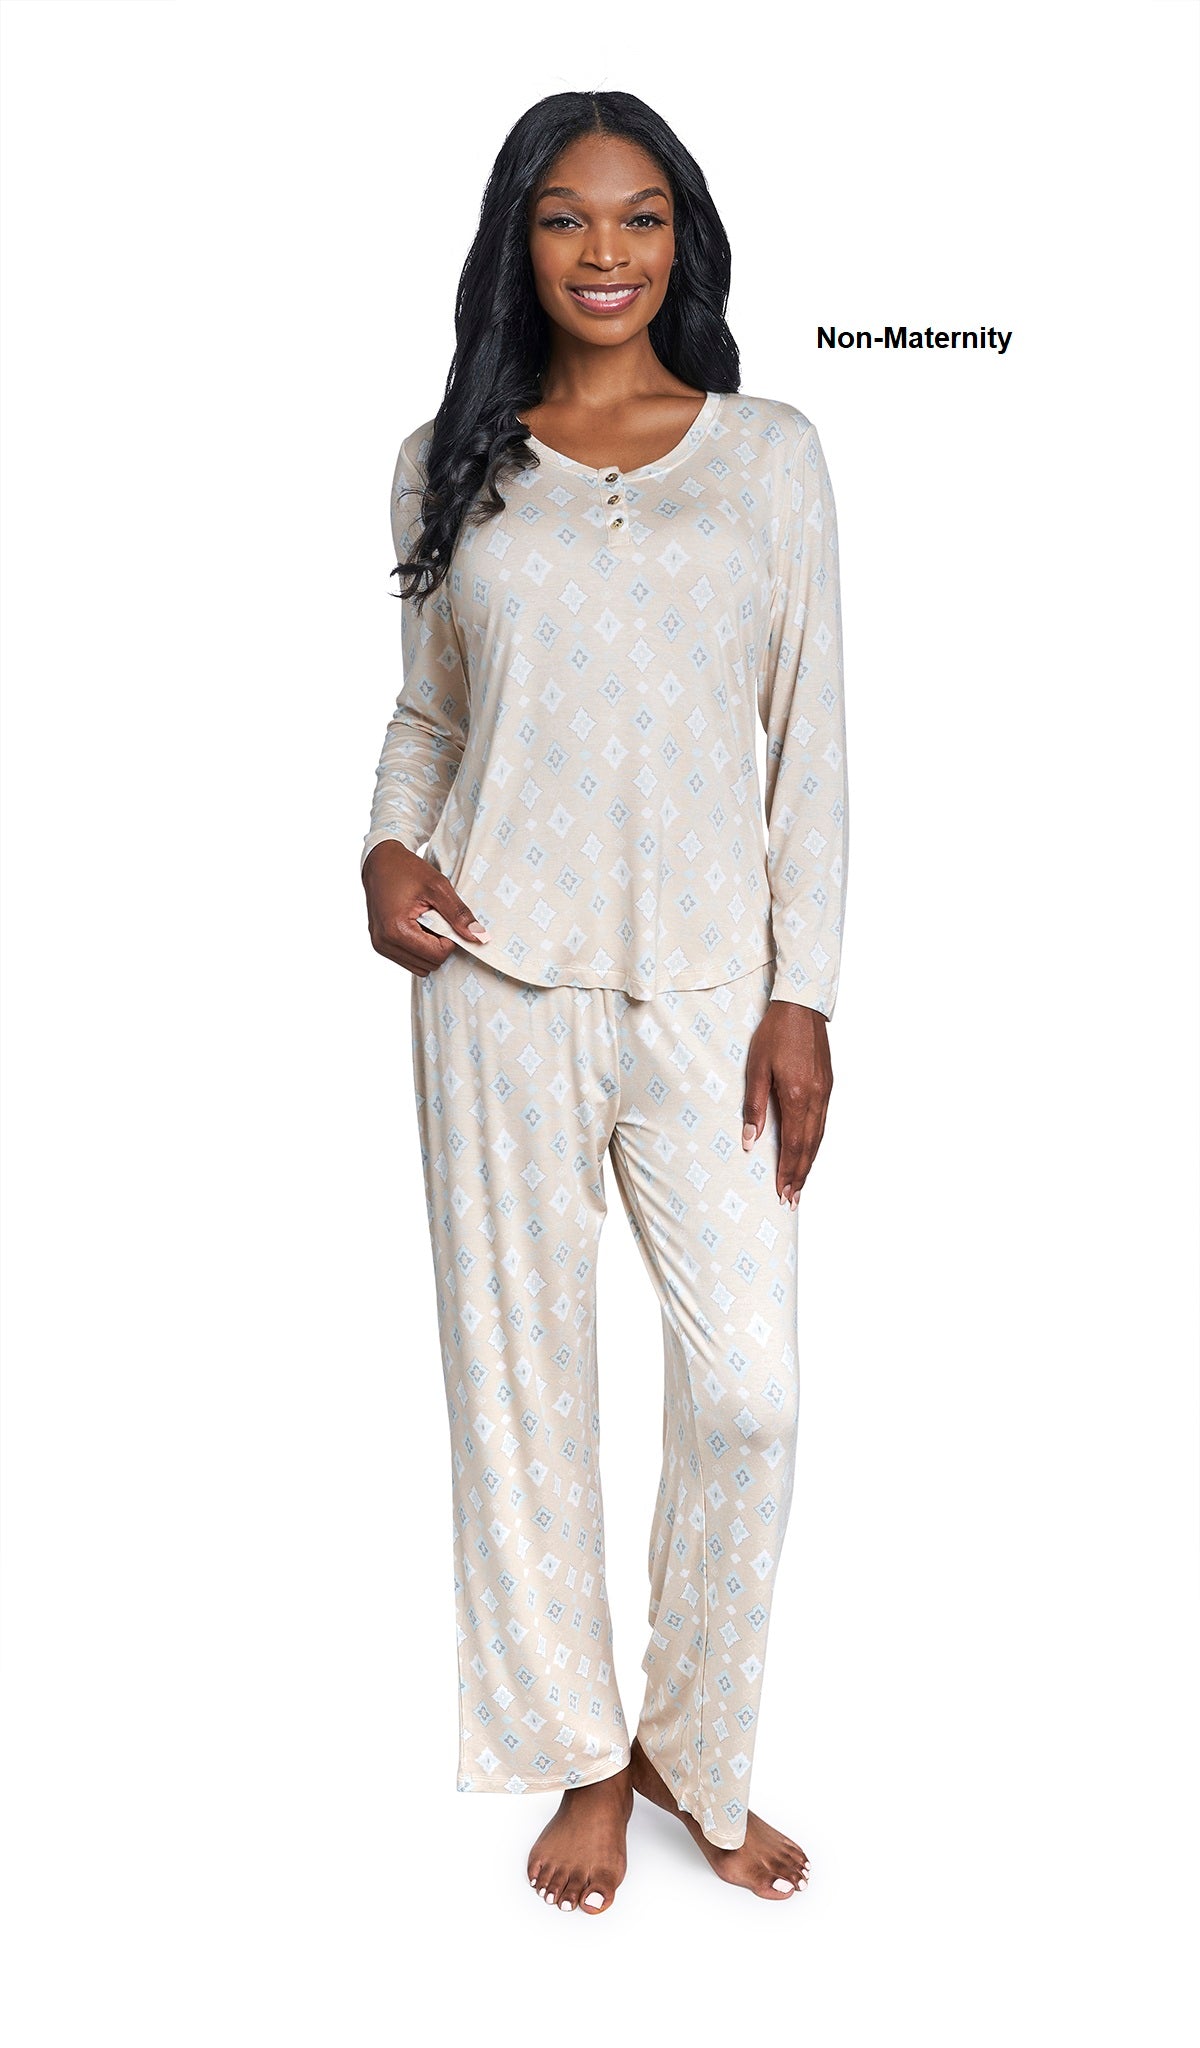 Mosaic Laina 2-Piece Set. Woman wearing button front placket long sleeve top and pant as non-maternity with one hand holding hem of shirt.